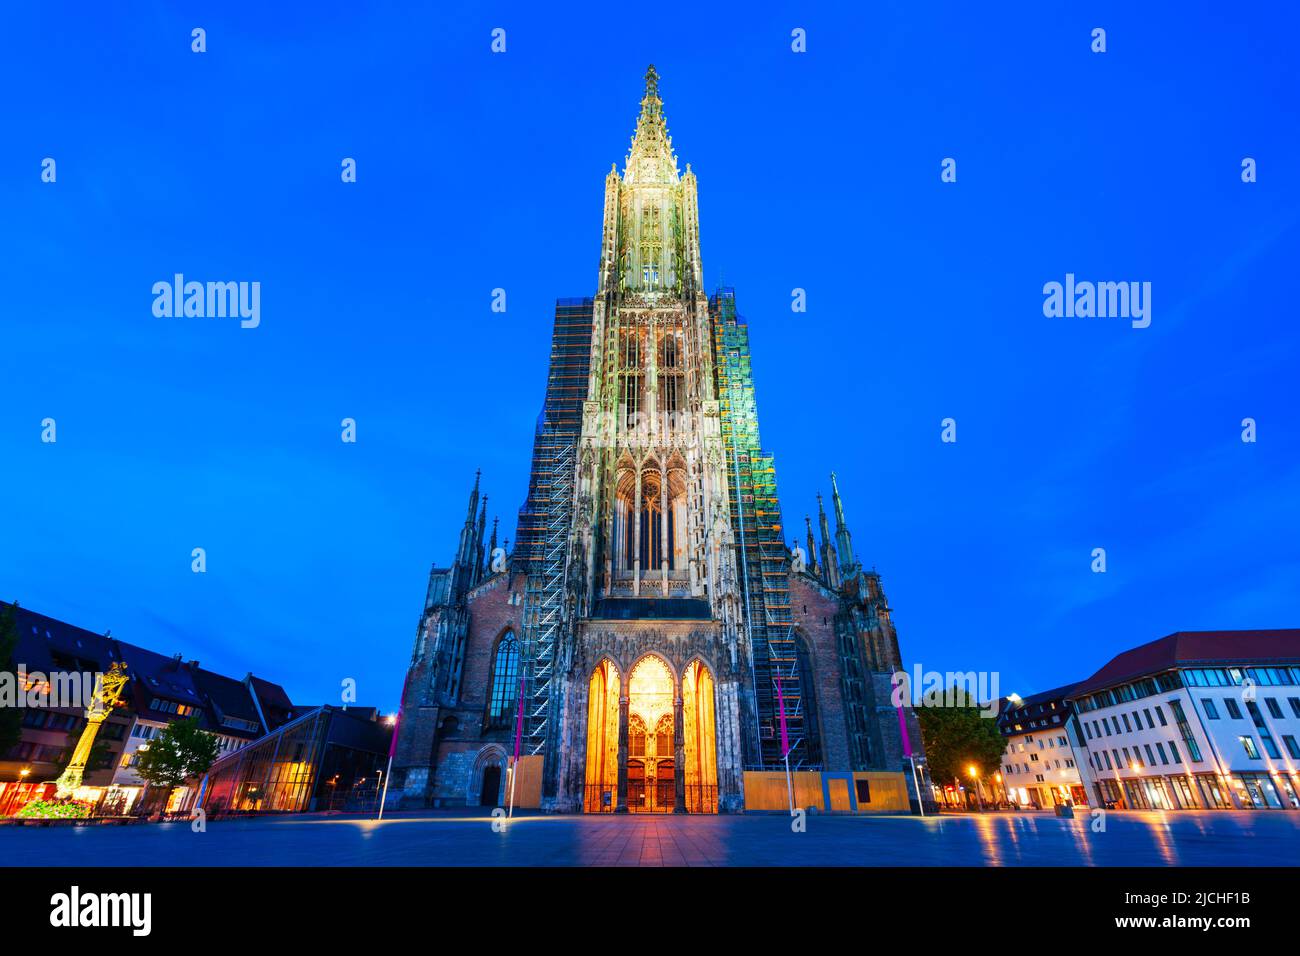 Ulm Minster or Ulmer Munster Cathedral is a Lutheran church located in Ulm, Germany. It is currently the tallest church in the world. Stock Photo